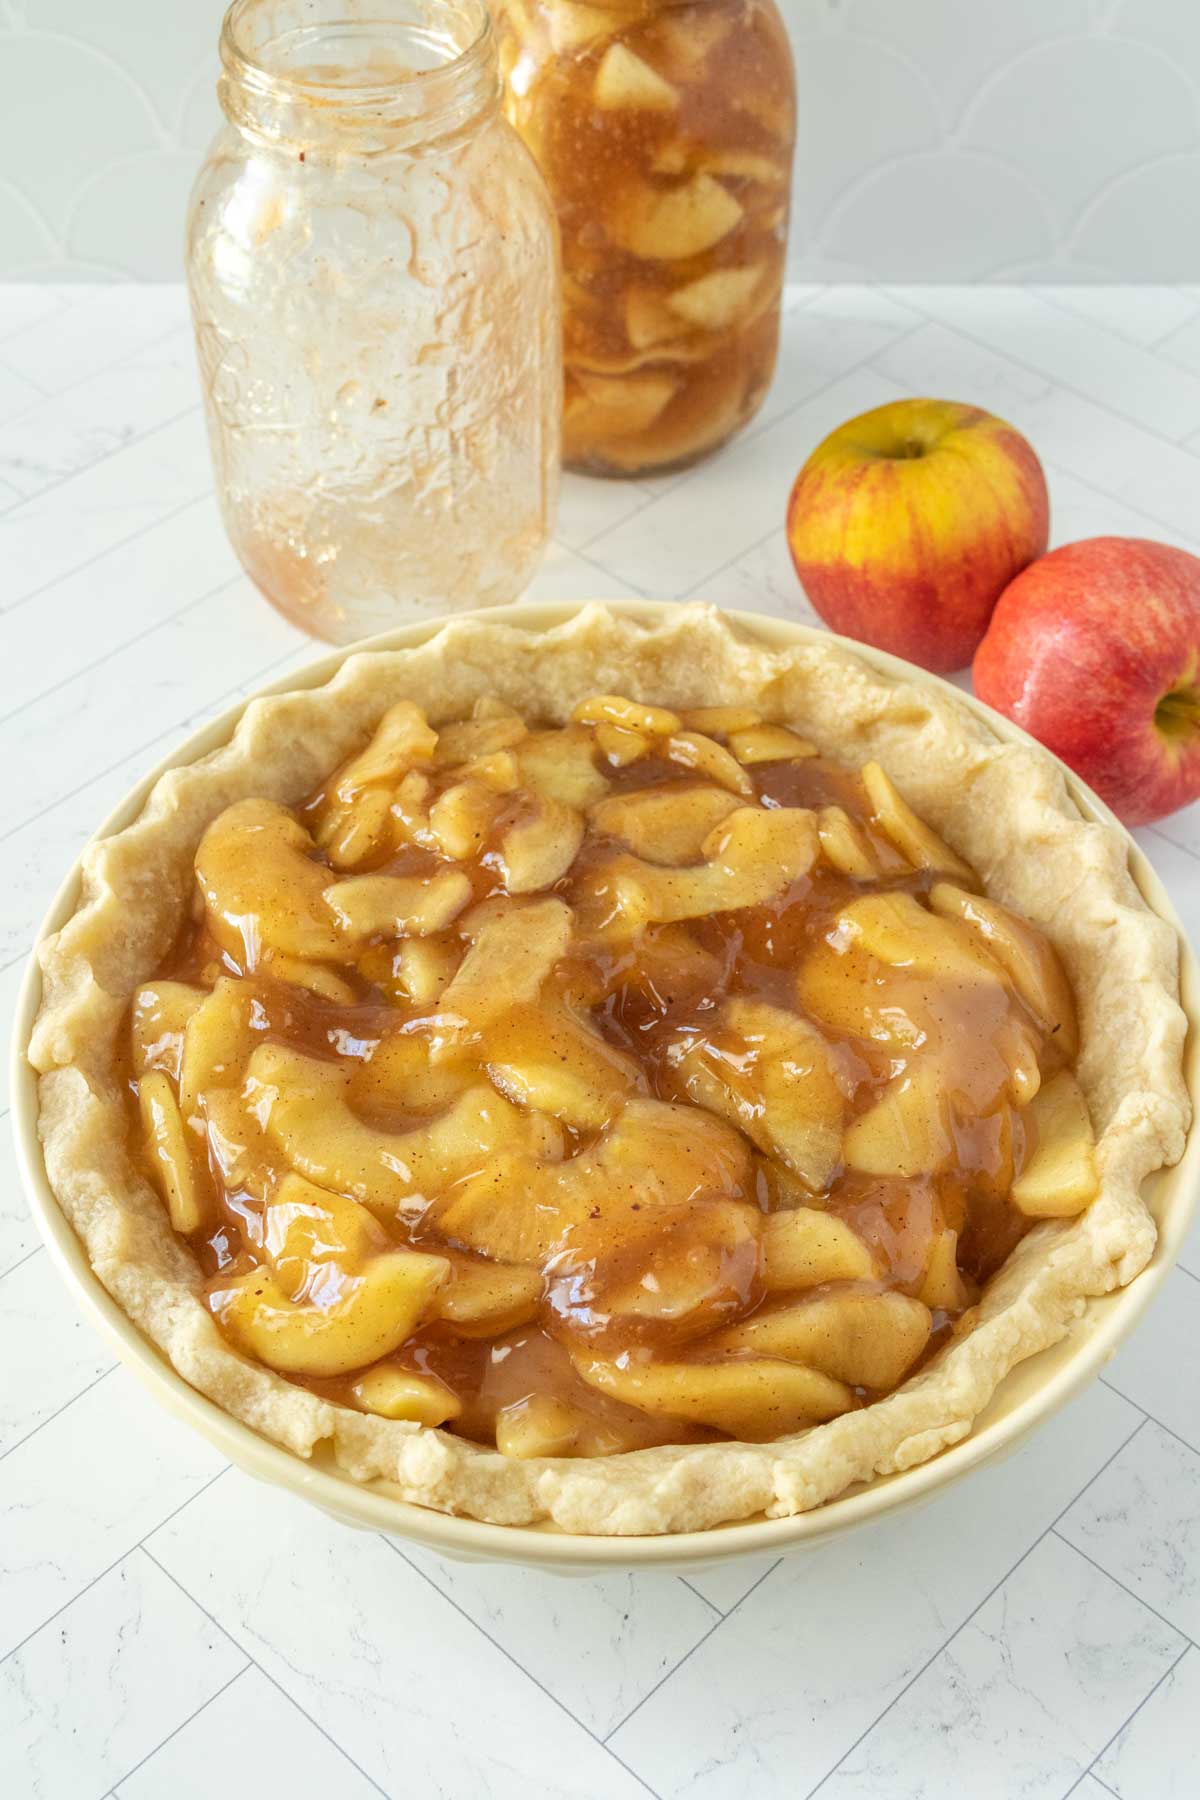 A pie with apples.